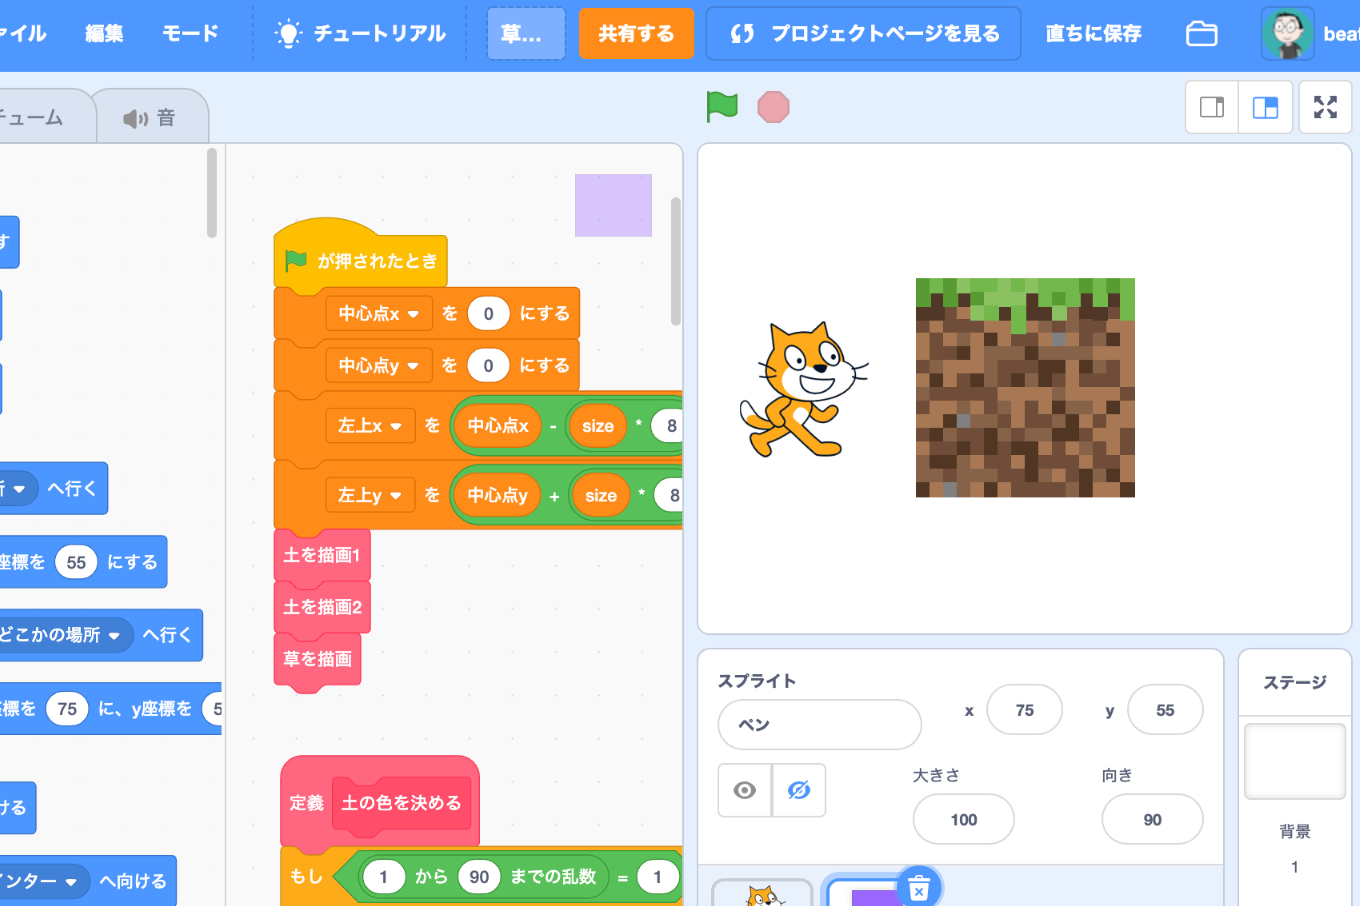 【Scratch】草ブロックを描画する